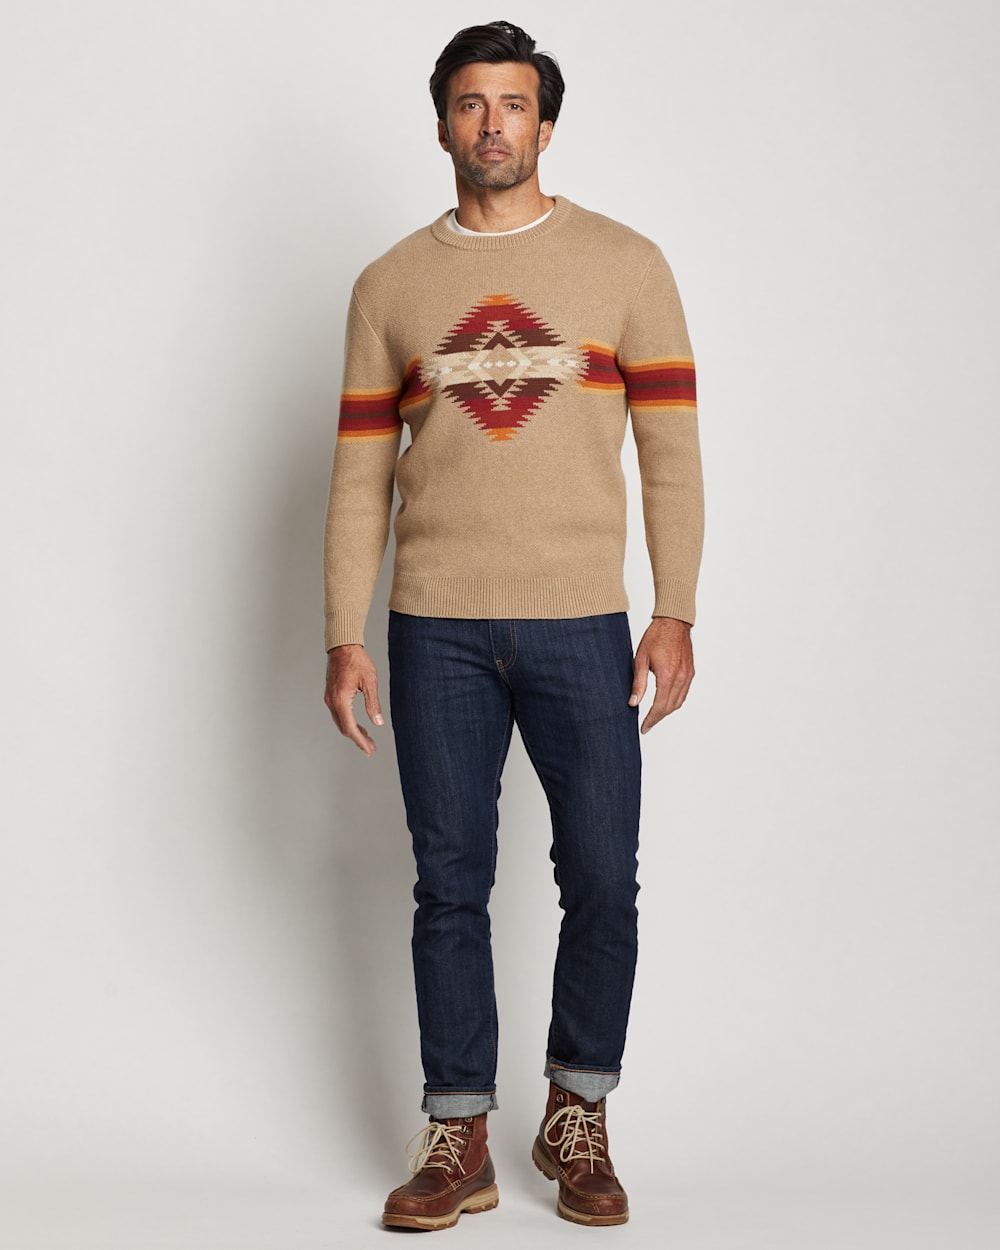 ALTERNATE VIEW OF MEN'S MISSION TRAILS COTTON SWEATER IN TAN image number 2